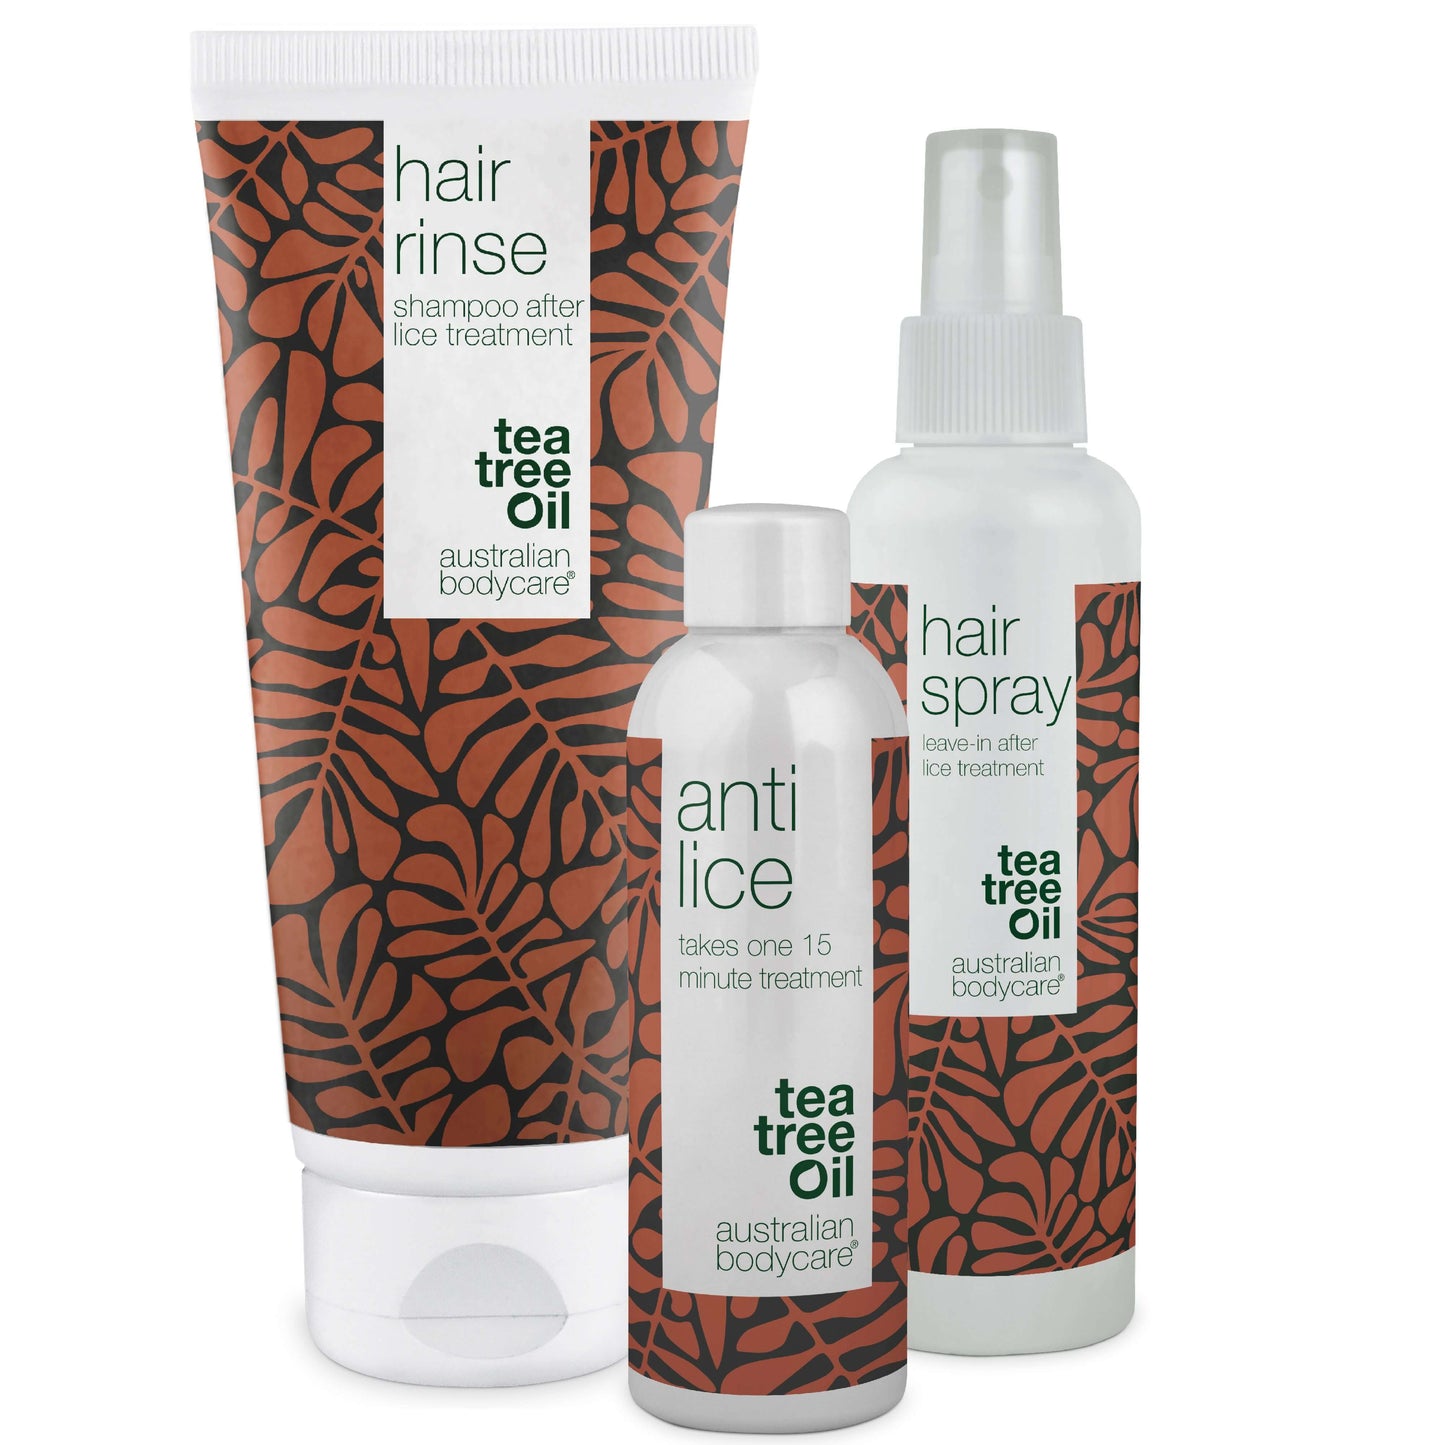 Australian Bodycare Head Lice Treatment Kit - 3 products for fast control of lice